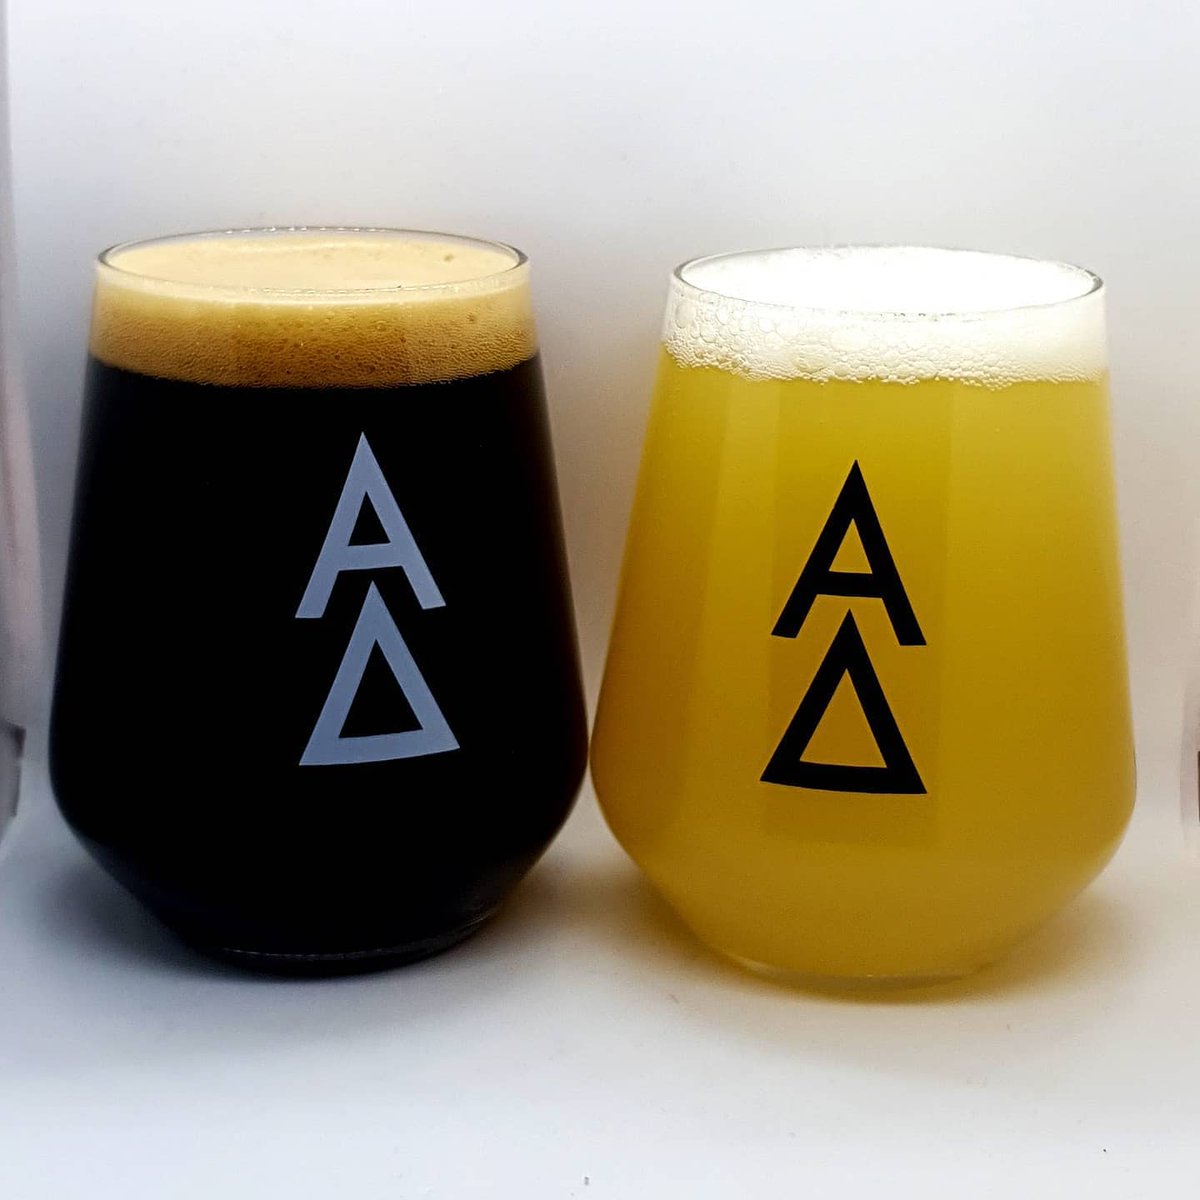 ON SALE NOW!!!!!!! 

Glasses are available now while stocks last.
 
alphadeltabrewing.com (link in bio)  
 
#AlphaDeltaBrewing #Brewing #Brewery #CraftBrewery #IndependantBrewery #UKbrewery #Merch #WhileStockslast